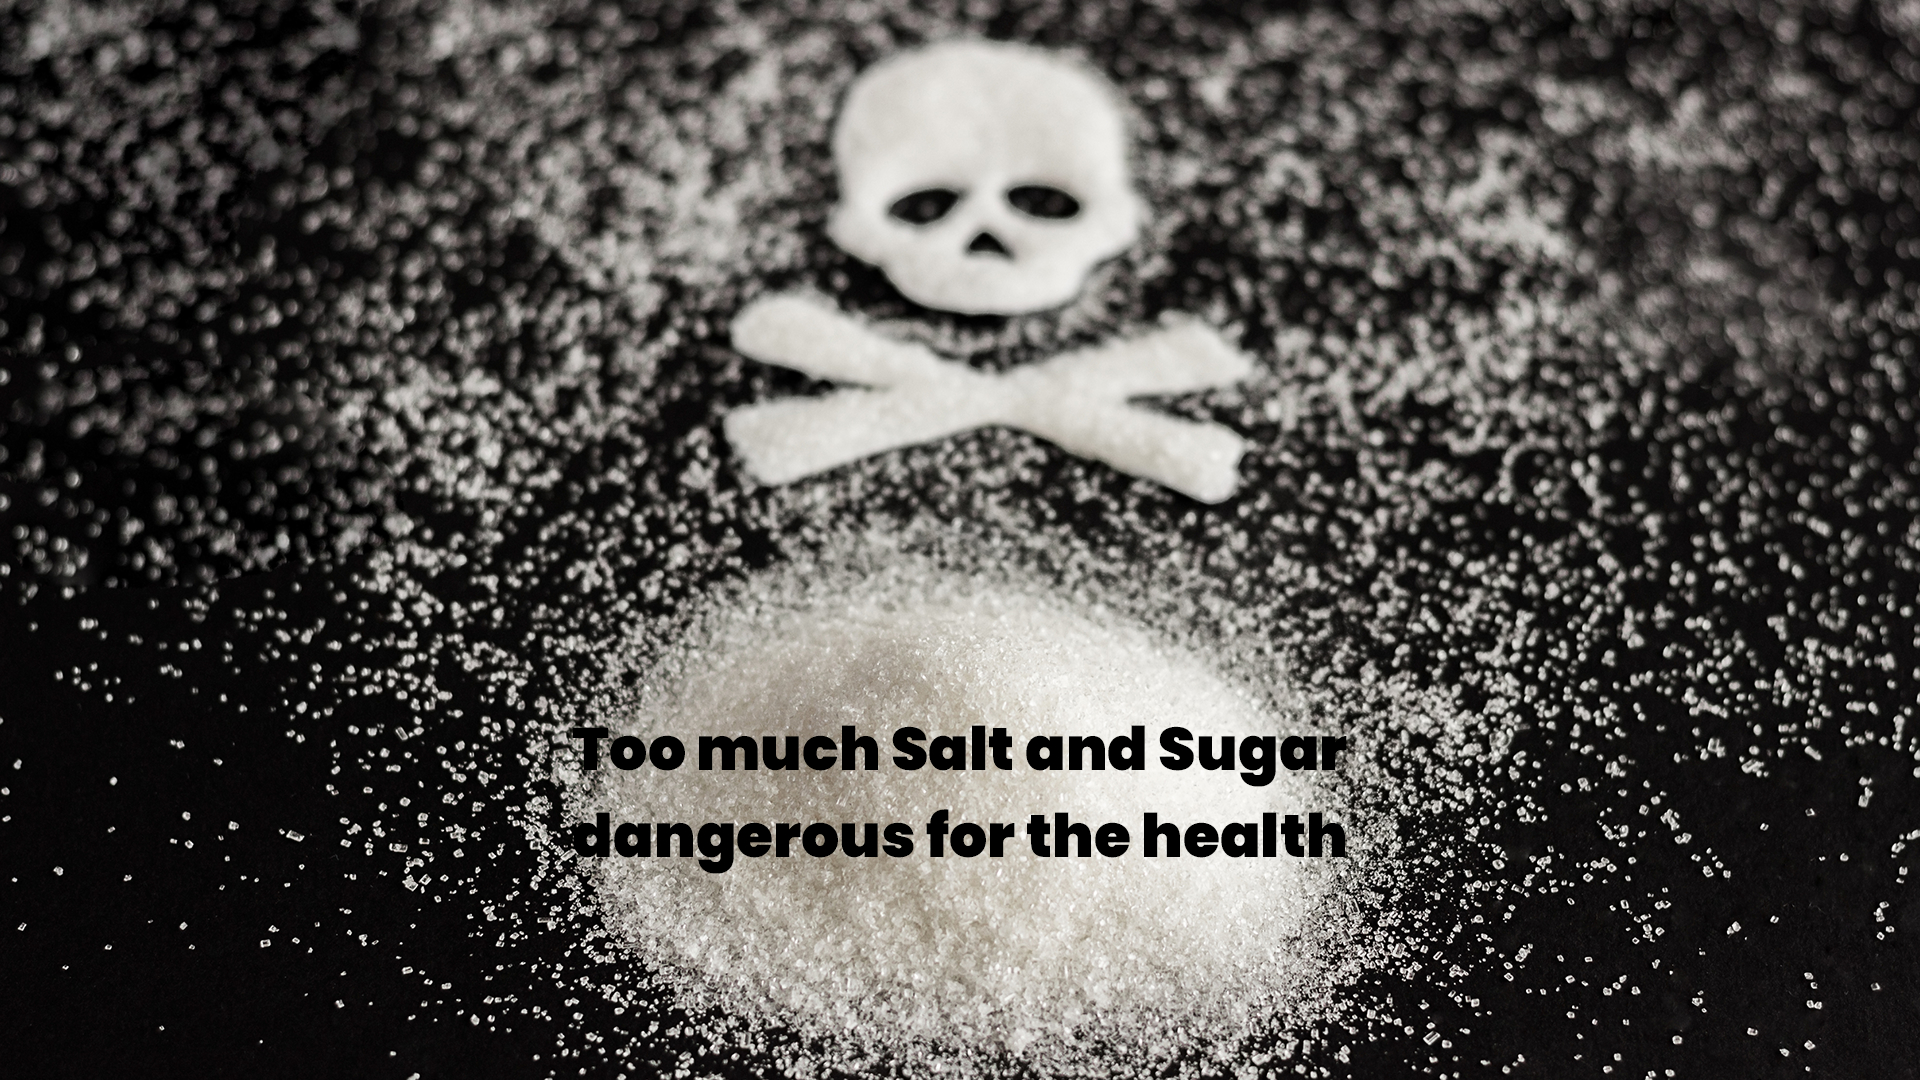 health issues globally, Too Much Salt and Sugar, Excess sugar intake, Excess salt intake, long-term